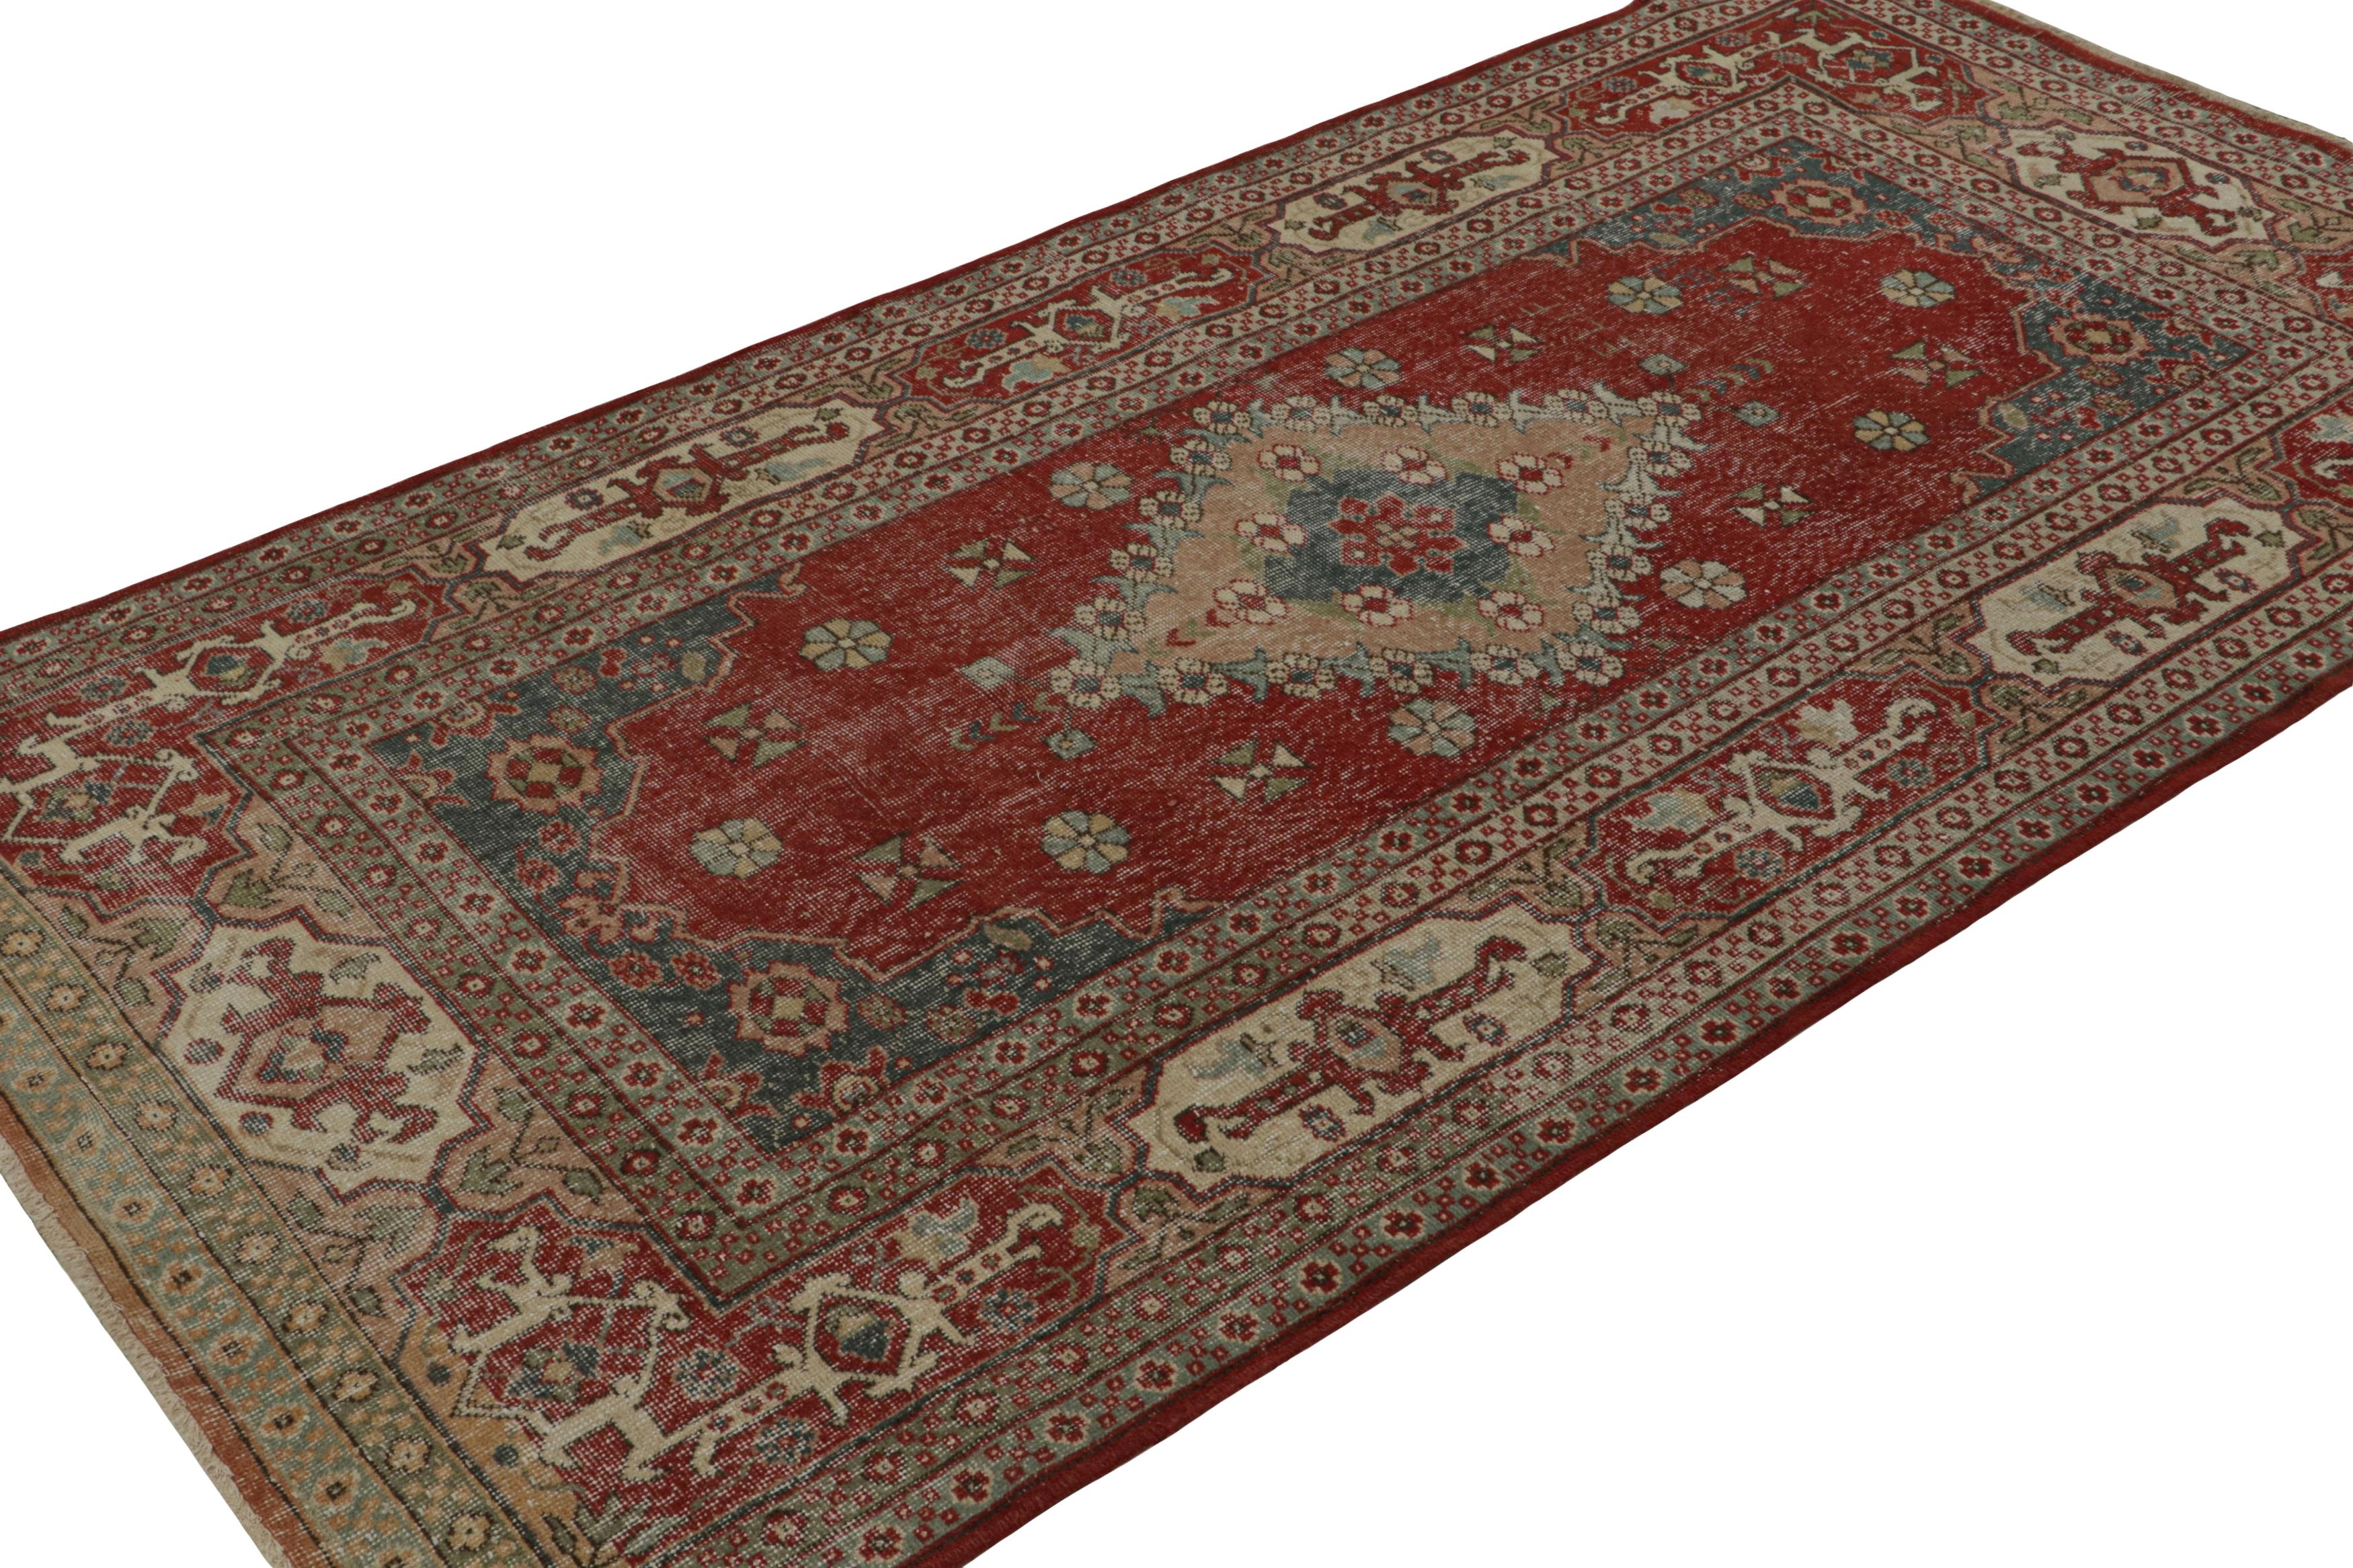 Hand-knotted in wool, circa 1960 - 1970, this 5x9 vintage Müren rug is an exciting new addition to Rug & Kilim Mid-century Pasha Collection. Its design is believed to have been inspired from traditional styles and Oriental rugs, particularly Persian